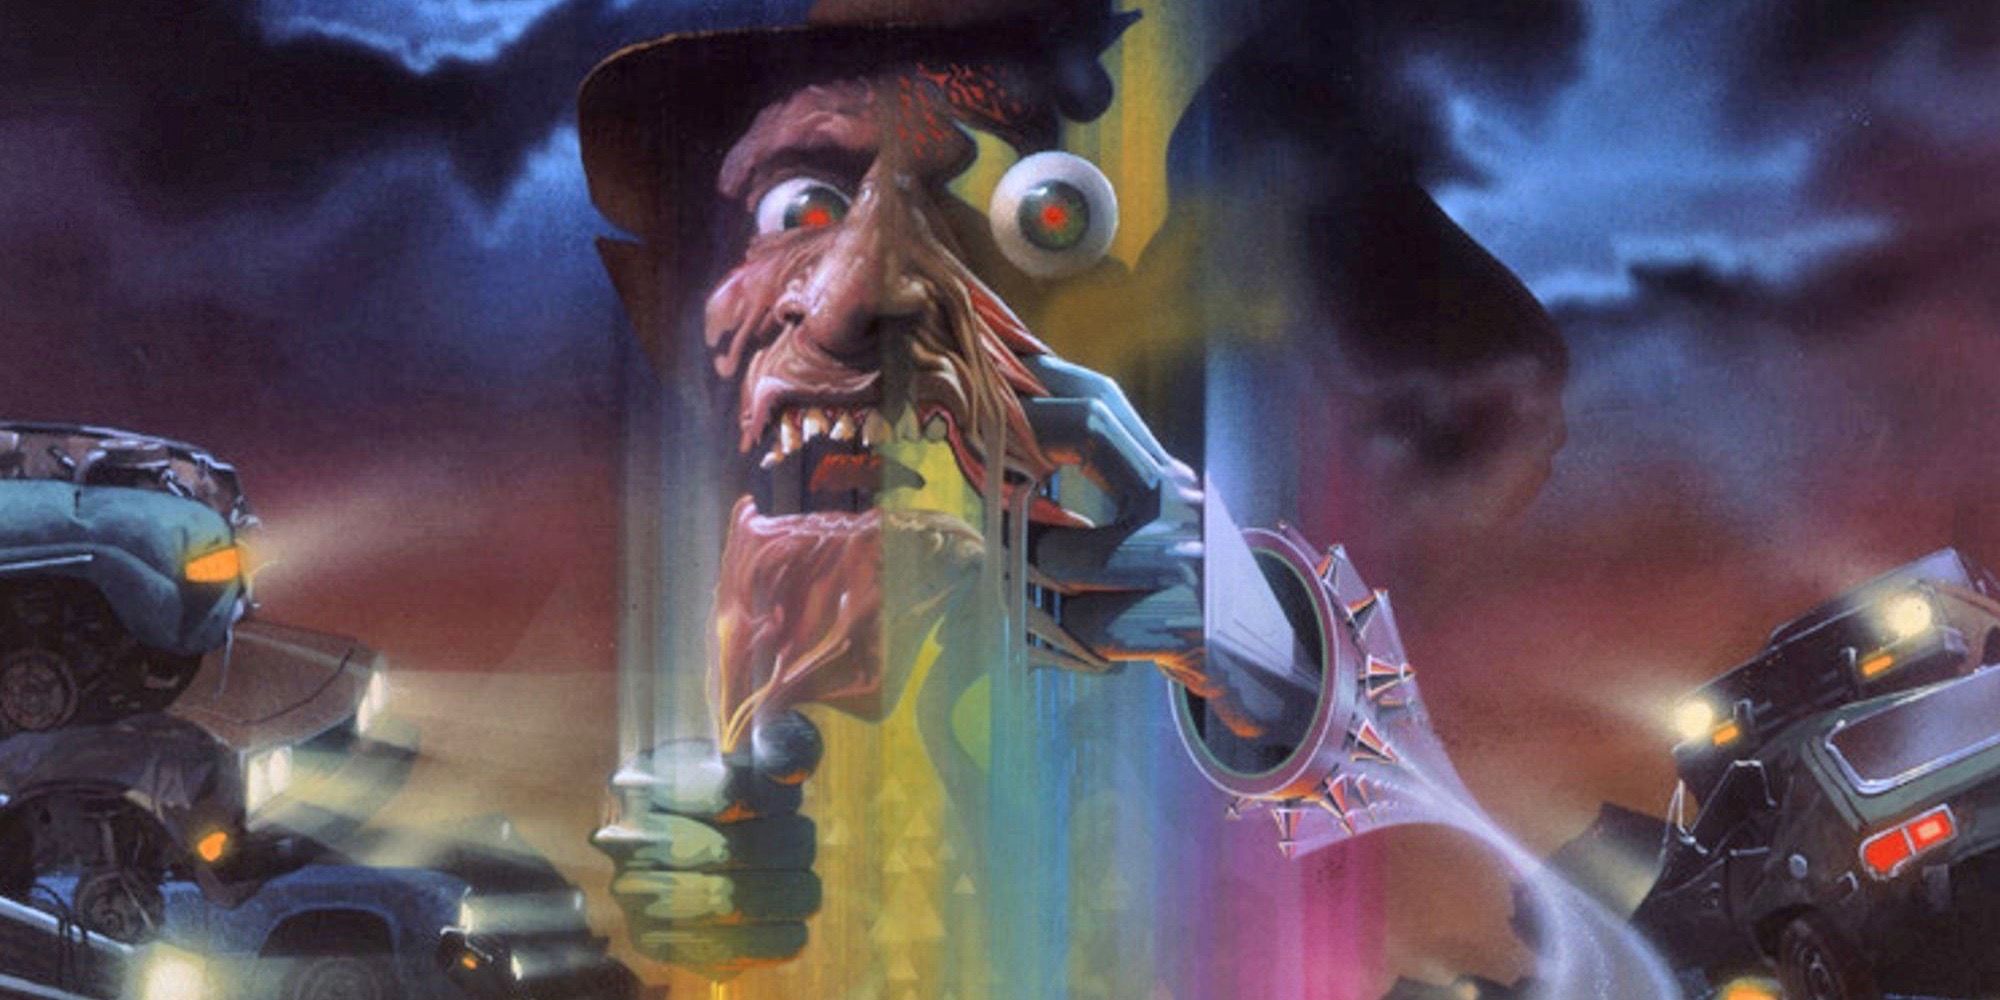 Ranking Of The Nightmare On Elm Street Movies Based On Their Rotten Tomatoes Scores